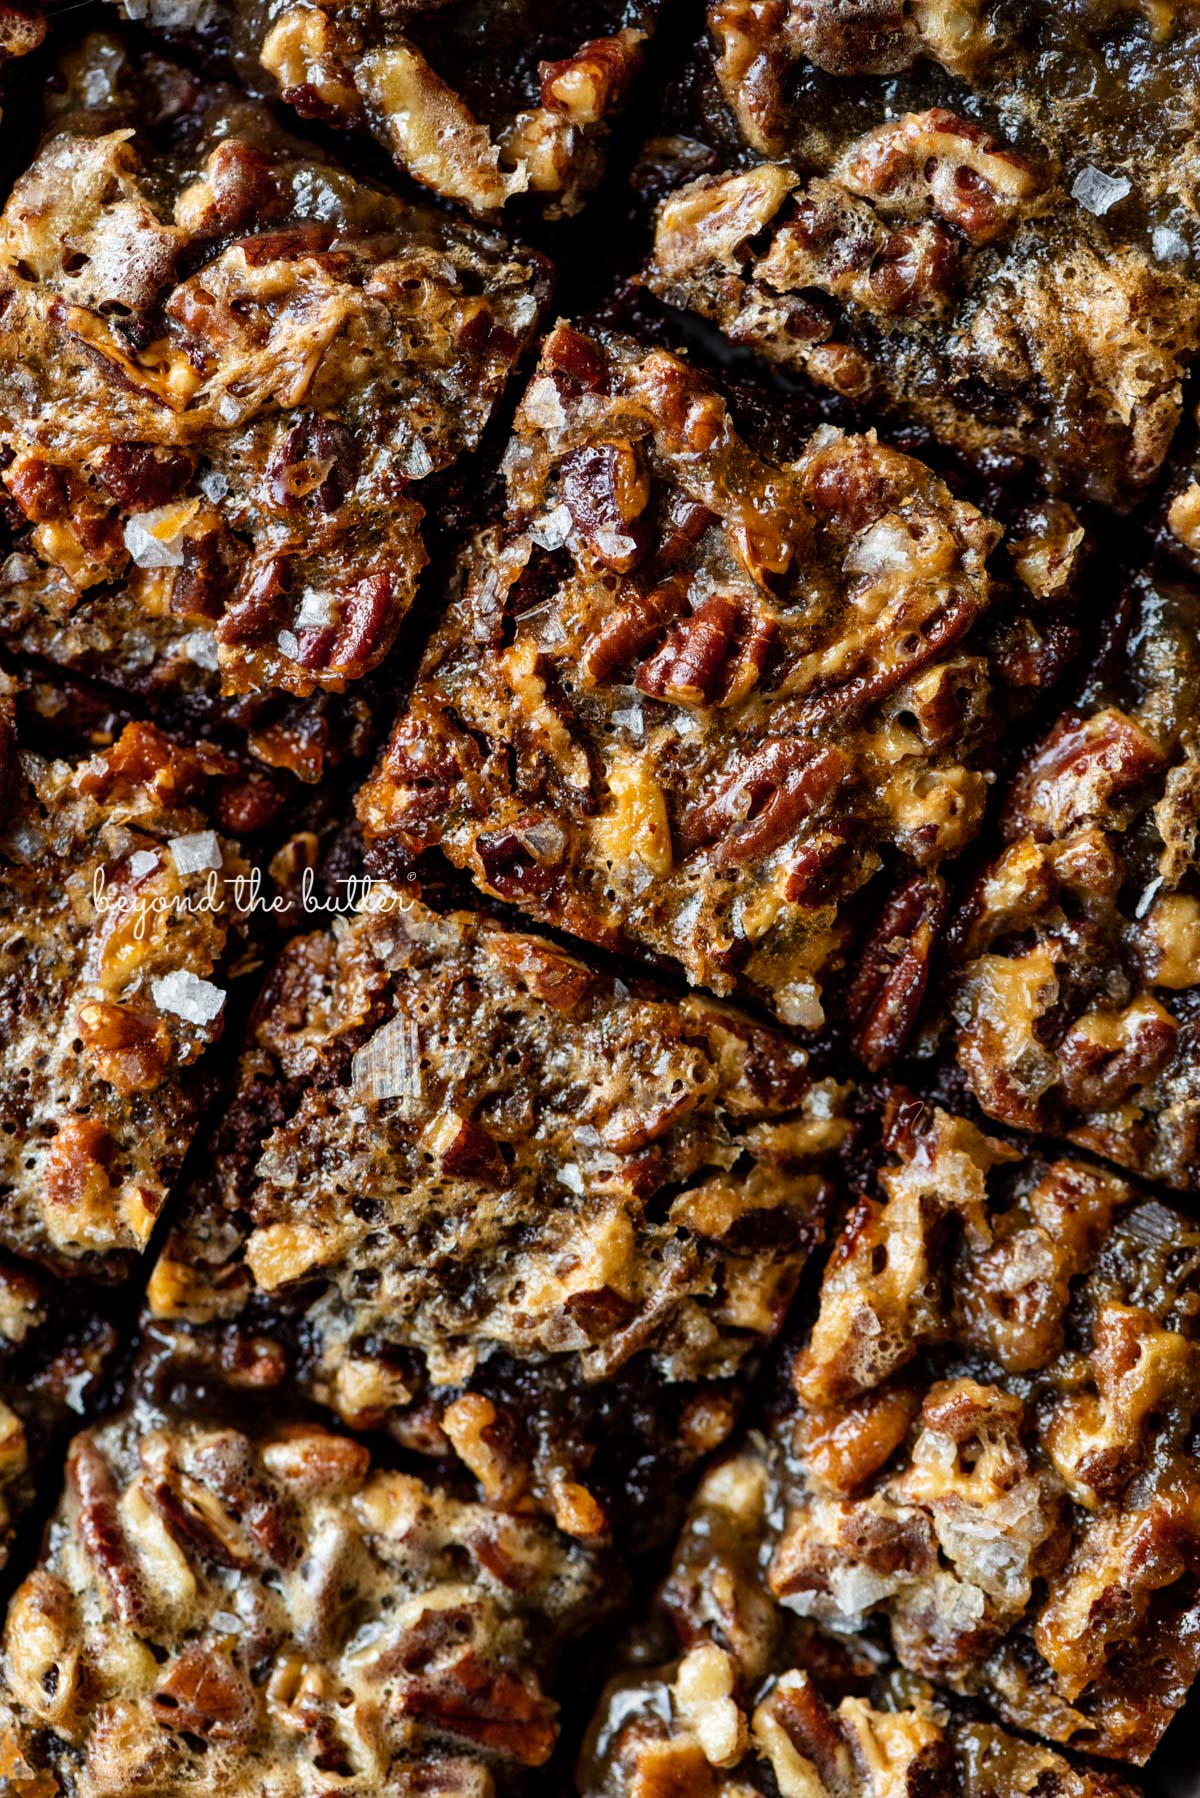 Just sliced salted pecan pie brownies from BeyondtheButter.com | © Beyond the Butter®